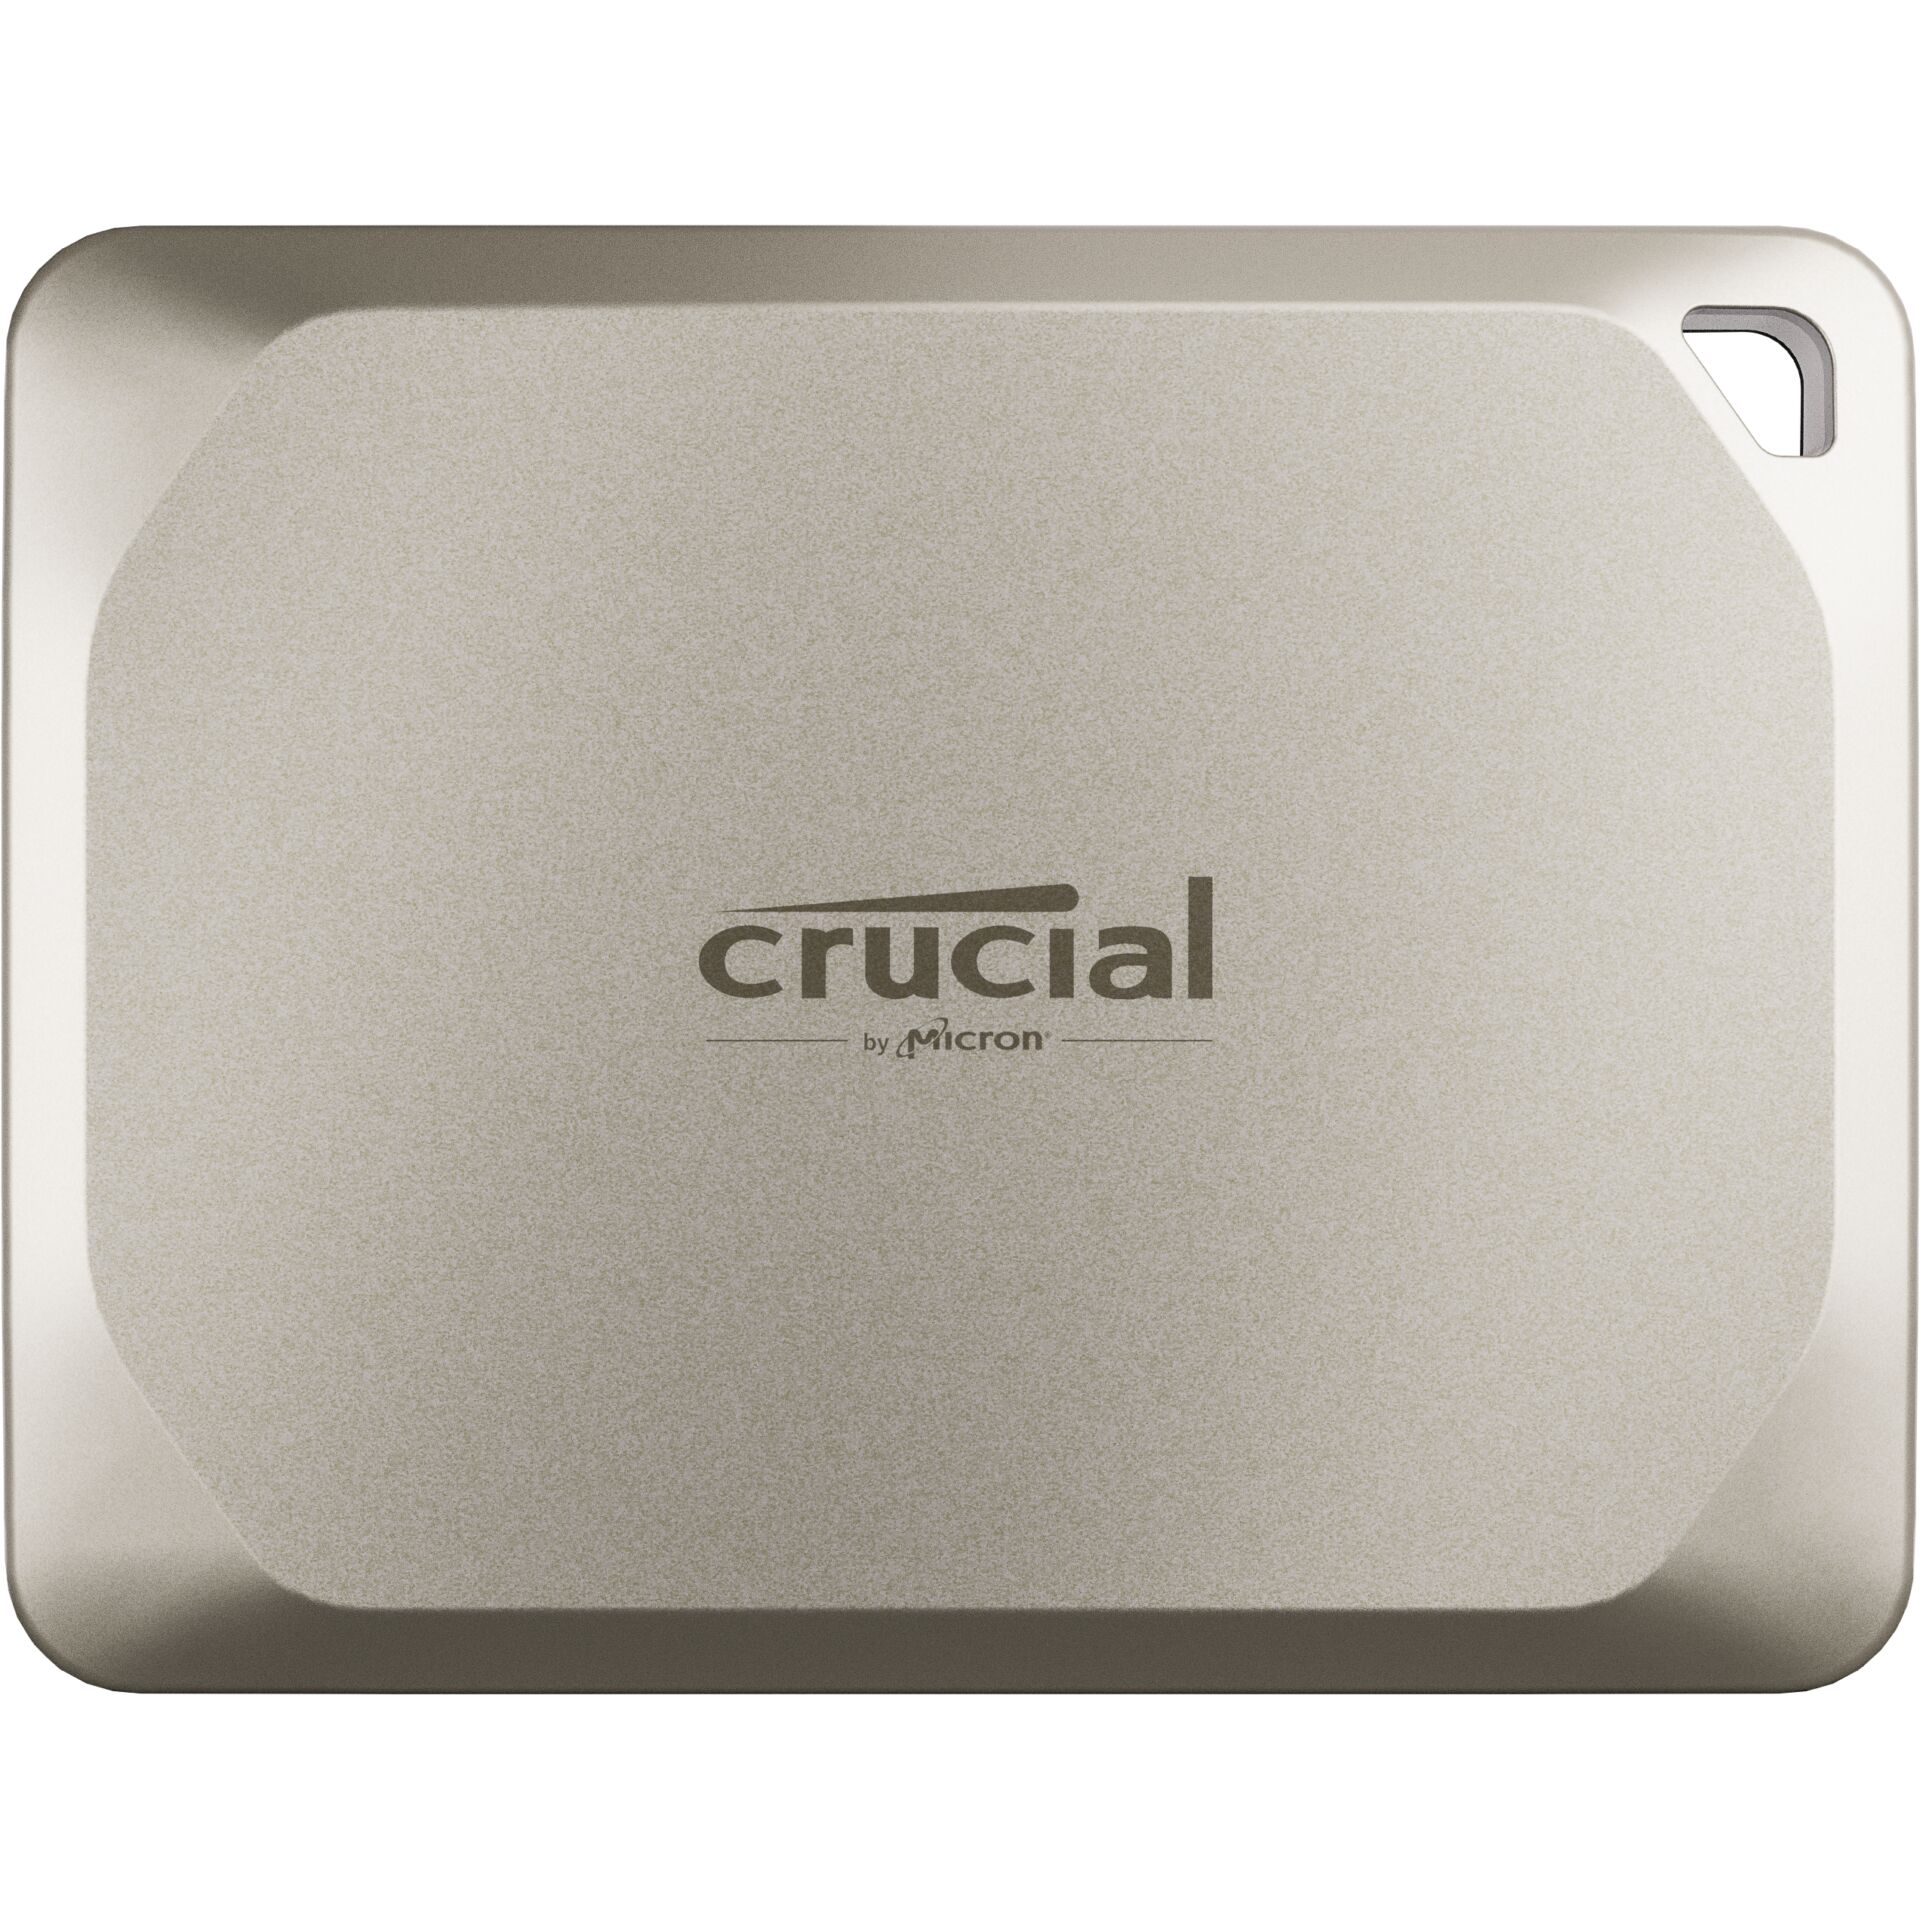 Crucial X9 Pro 1TB Portable SSD USB 3.2 Gen 2 Solid State Drive